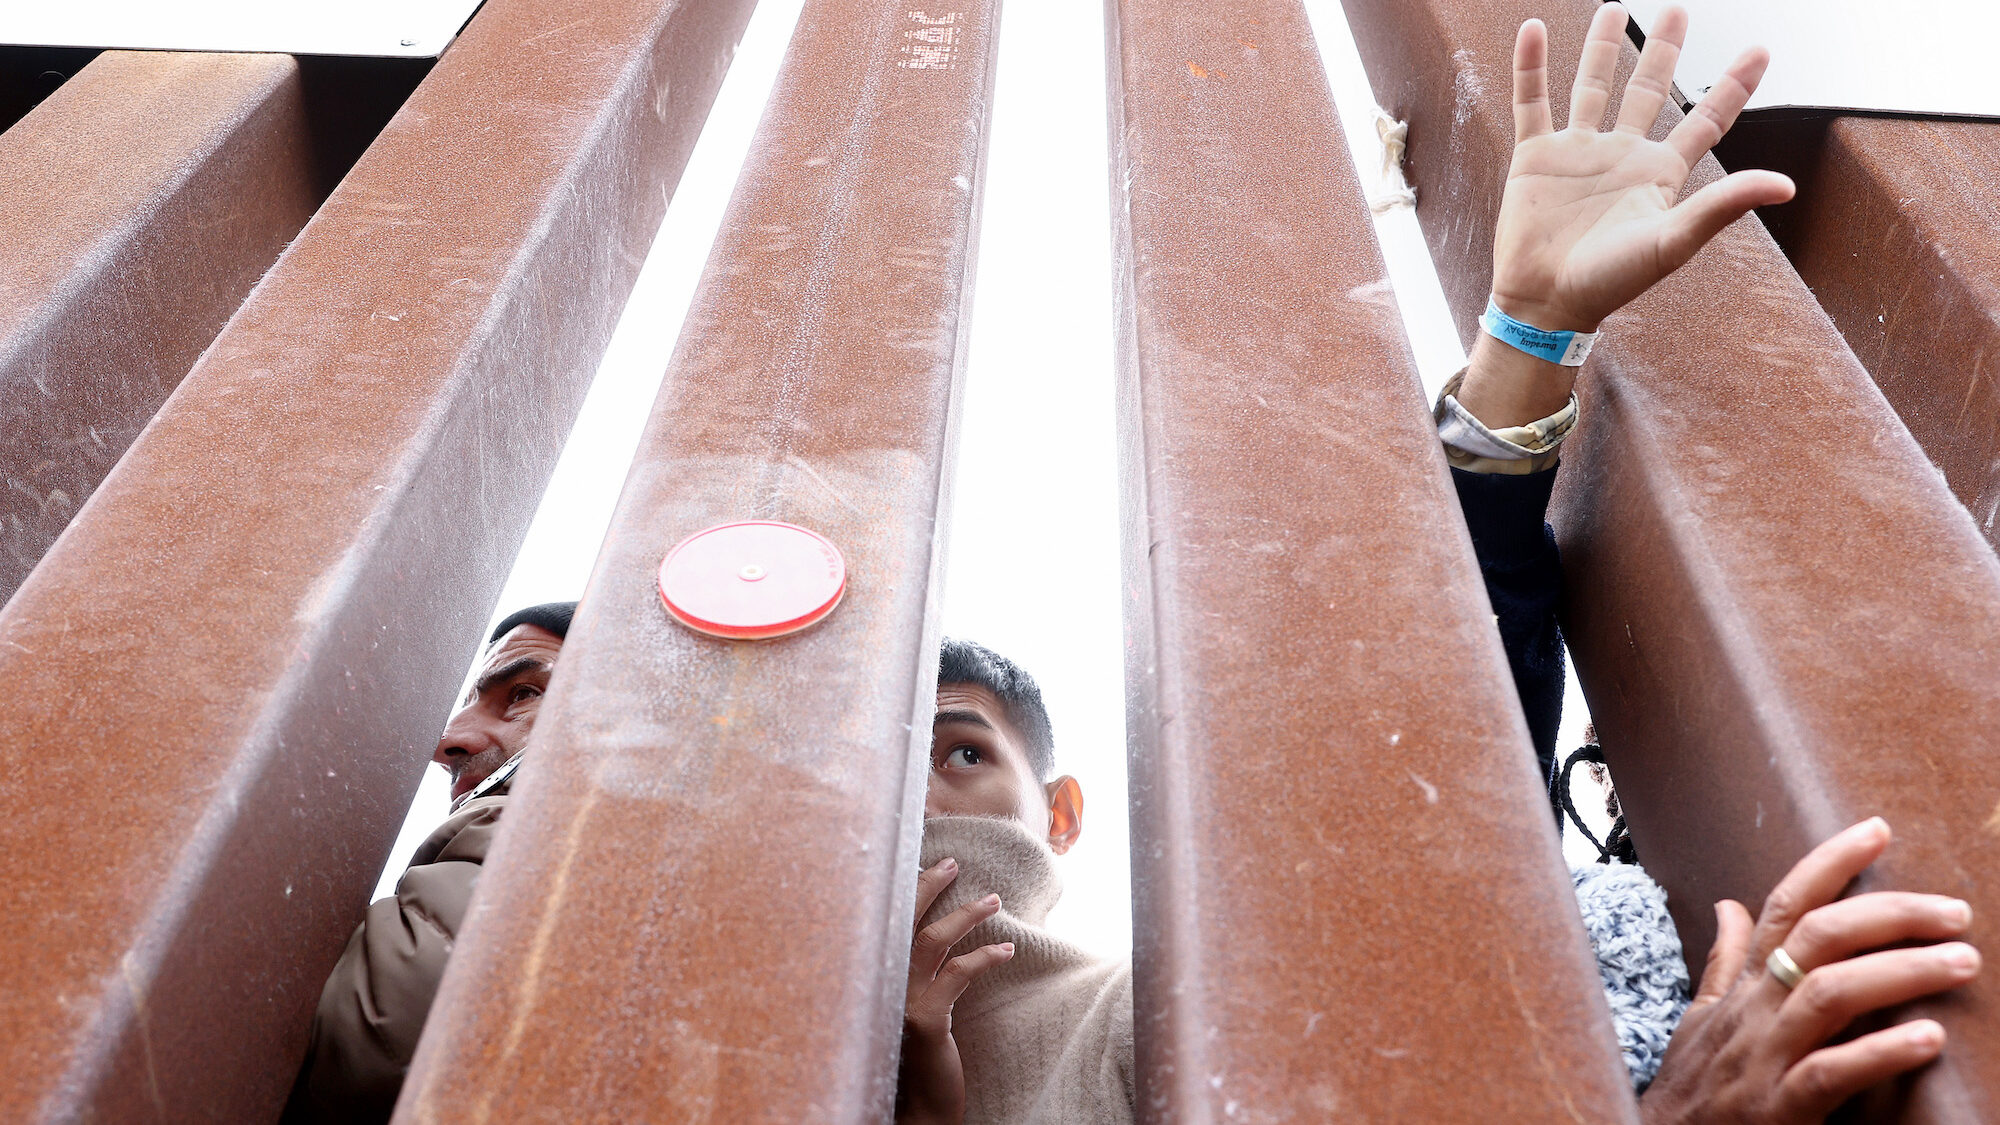 Migrants seeking asylum in the US look through the border wall as volunteers offer assistance on th...